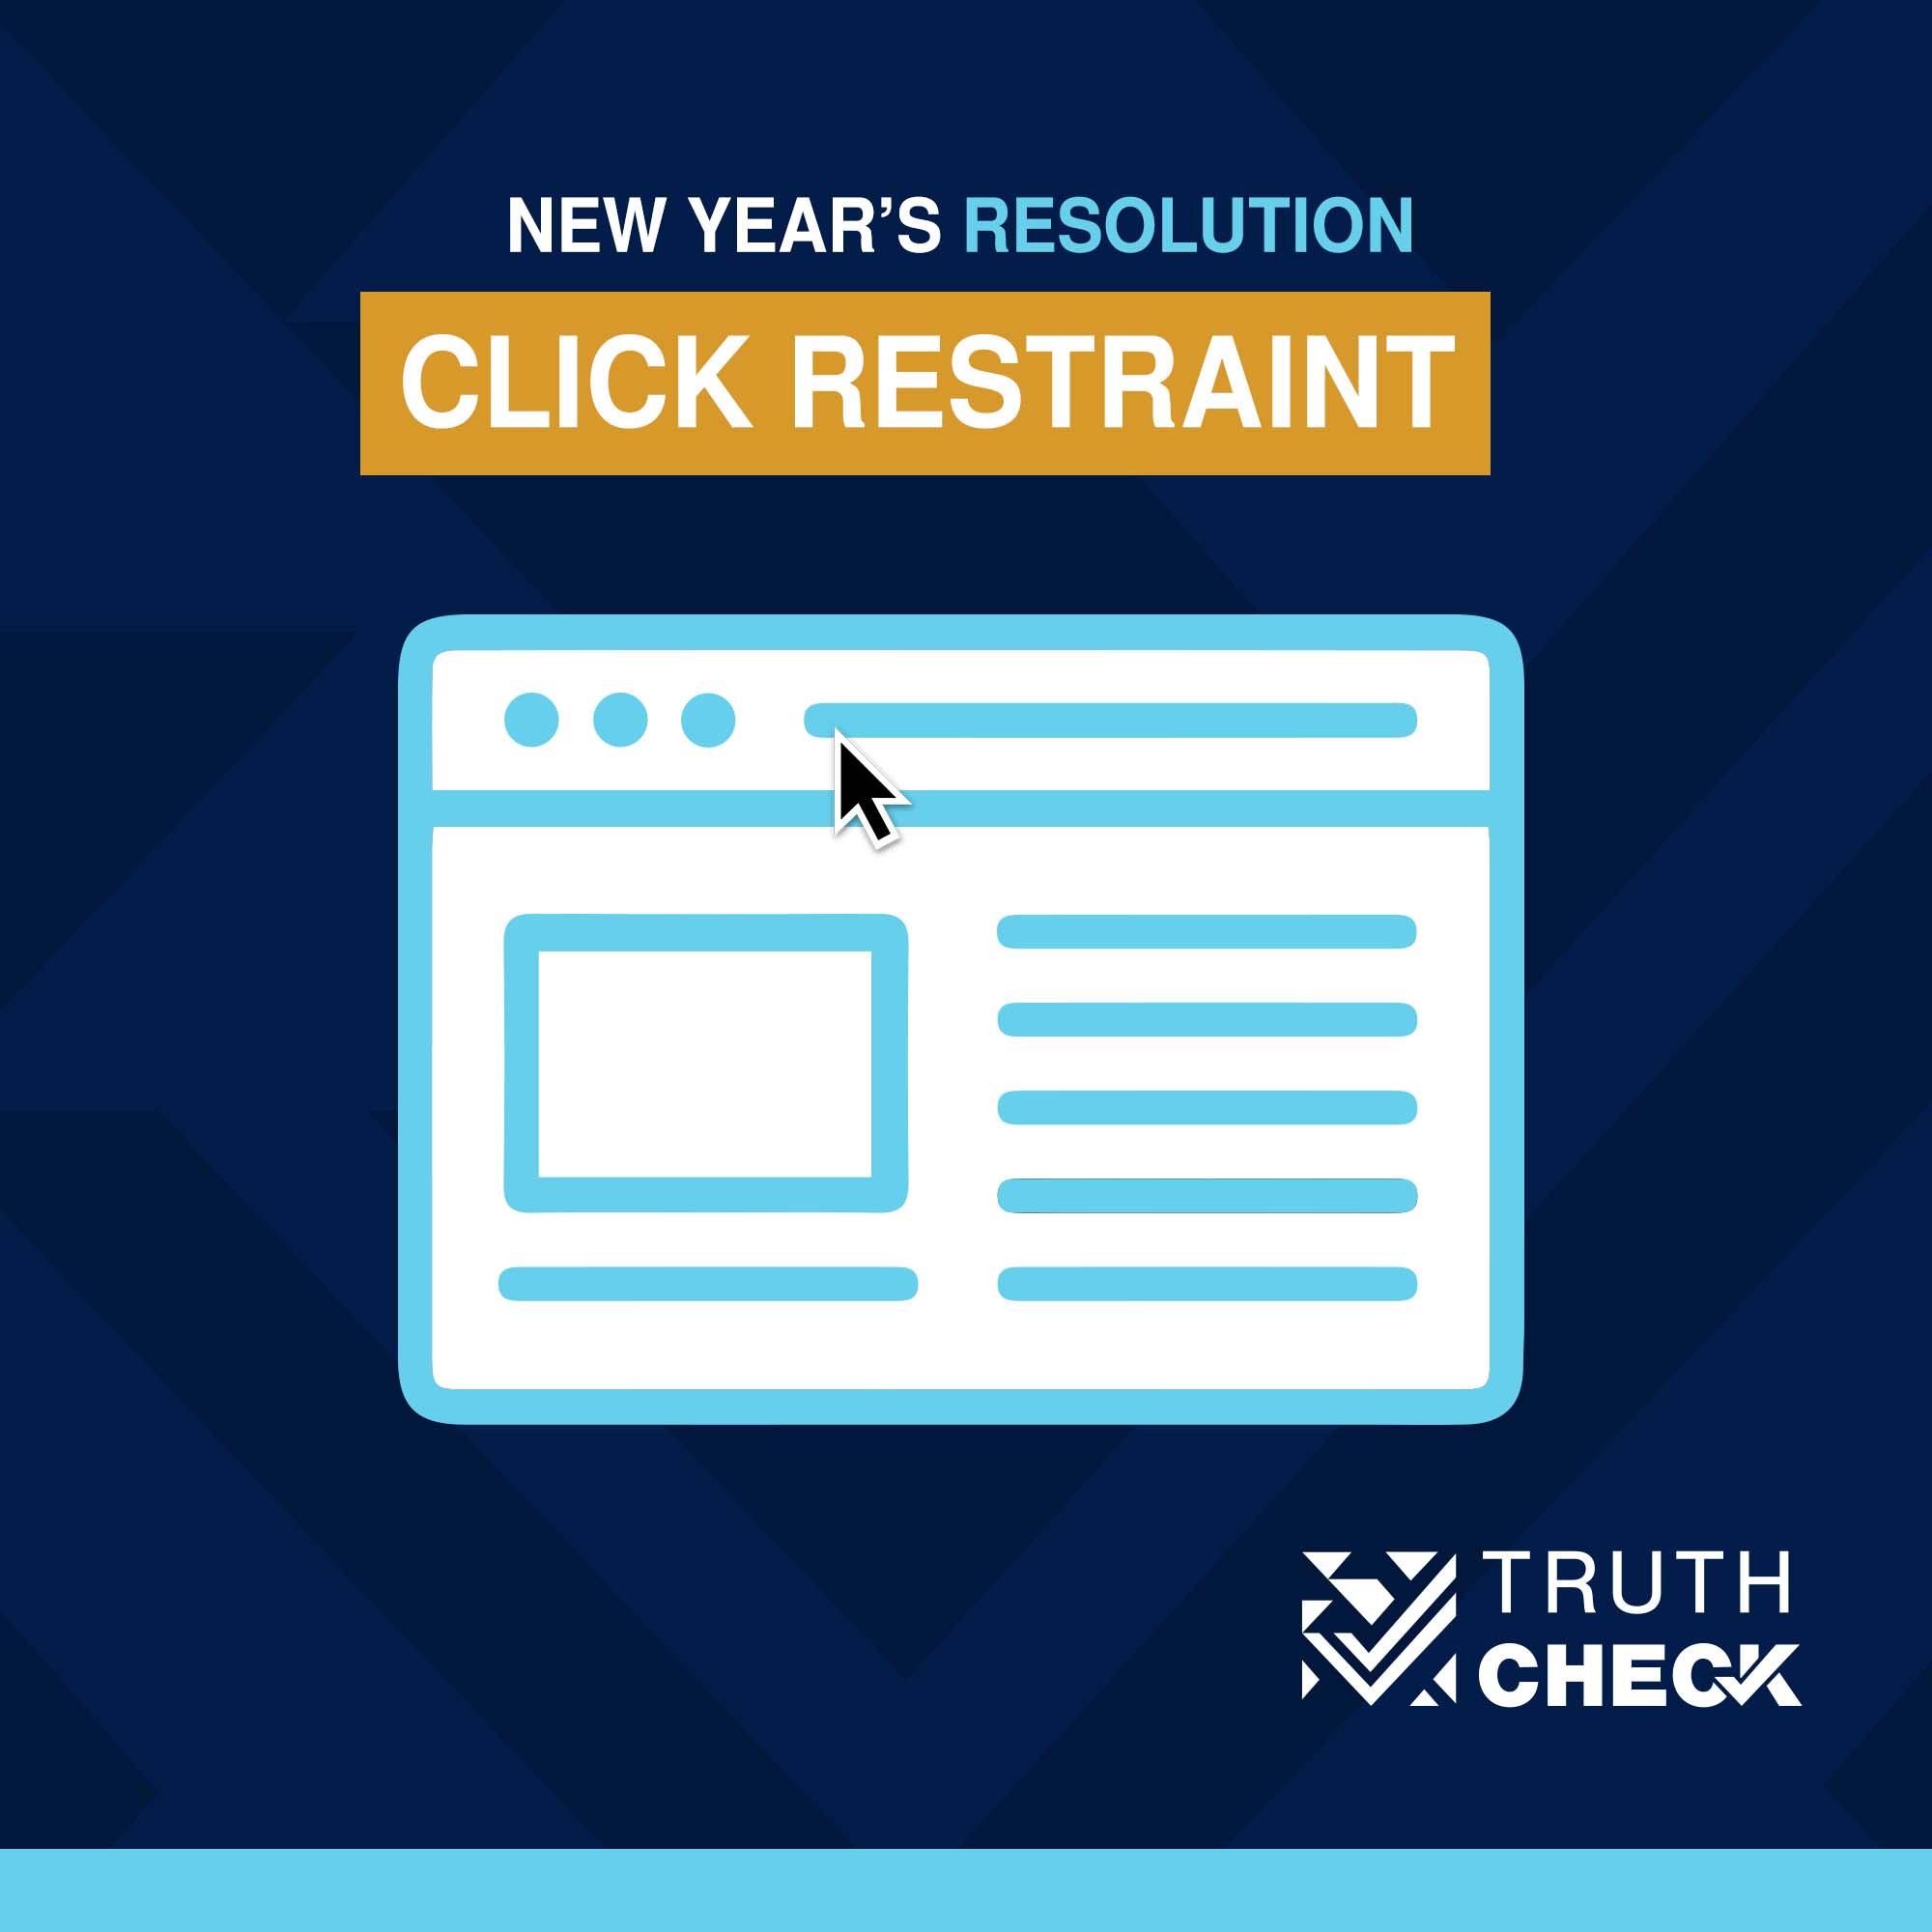 Light blue and white simple outline of a computer screen over a dark blue background with the title, "New Year's Resolution: Click Restraint" and a Truth Check logo on the bottom right. 